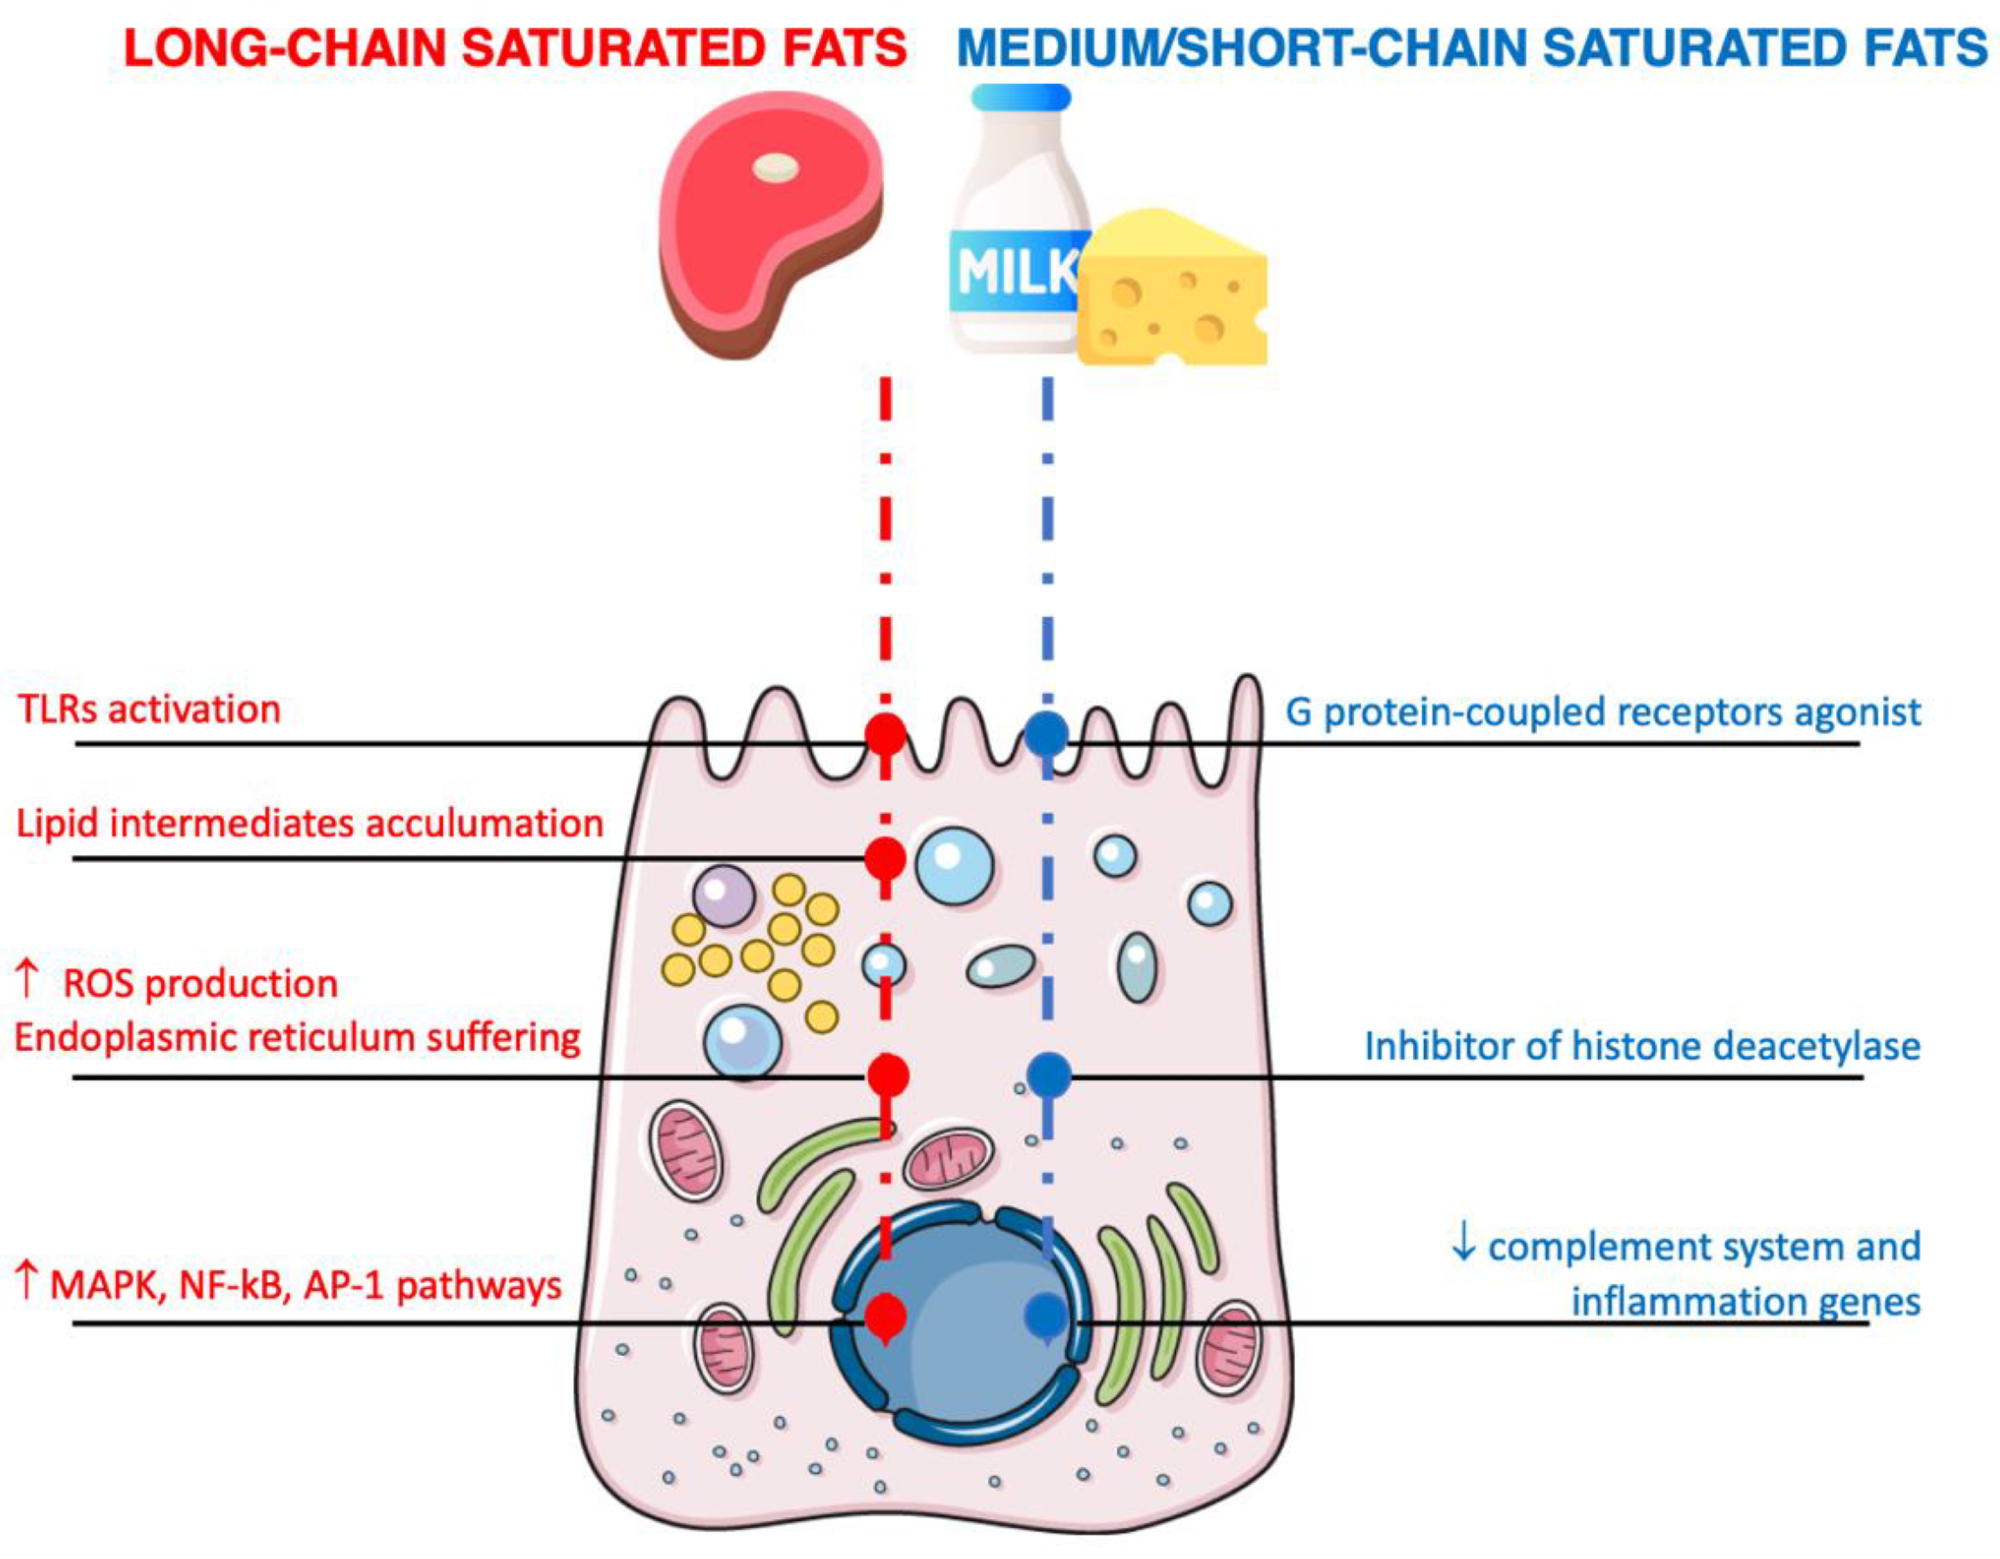 Mechanisms of action related to the effects of the inflammatory pathways of saturated fatty acids on intestinal cells. Arrows denote increment/increase or decrement/decrease.